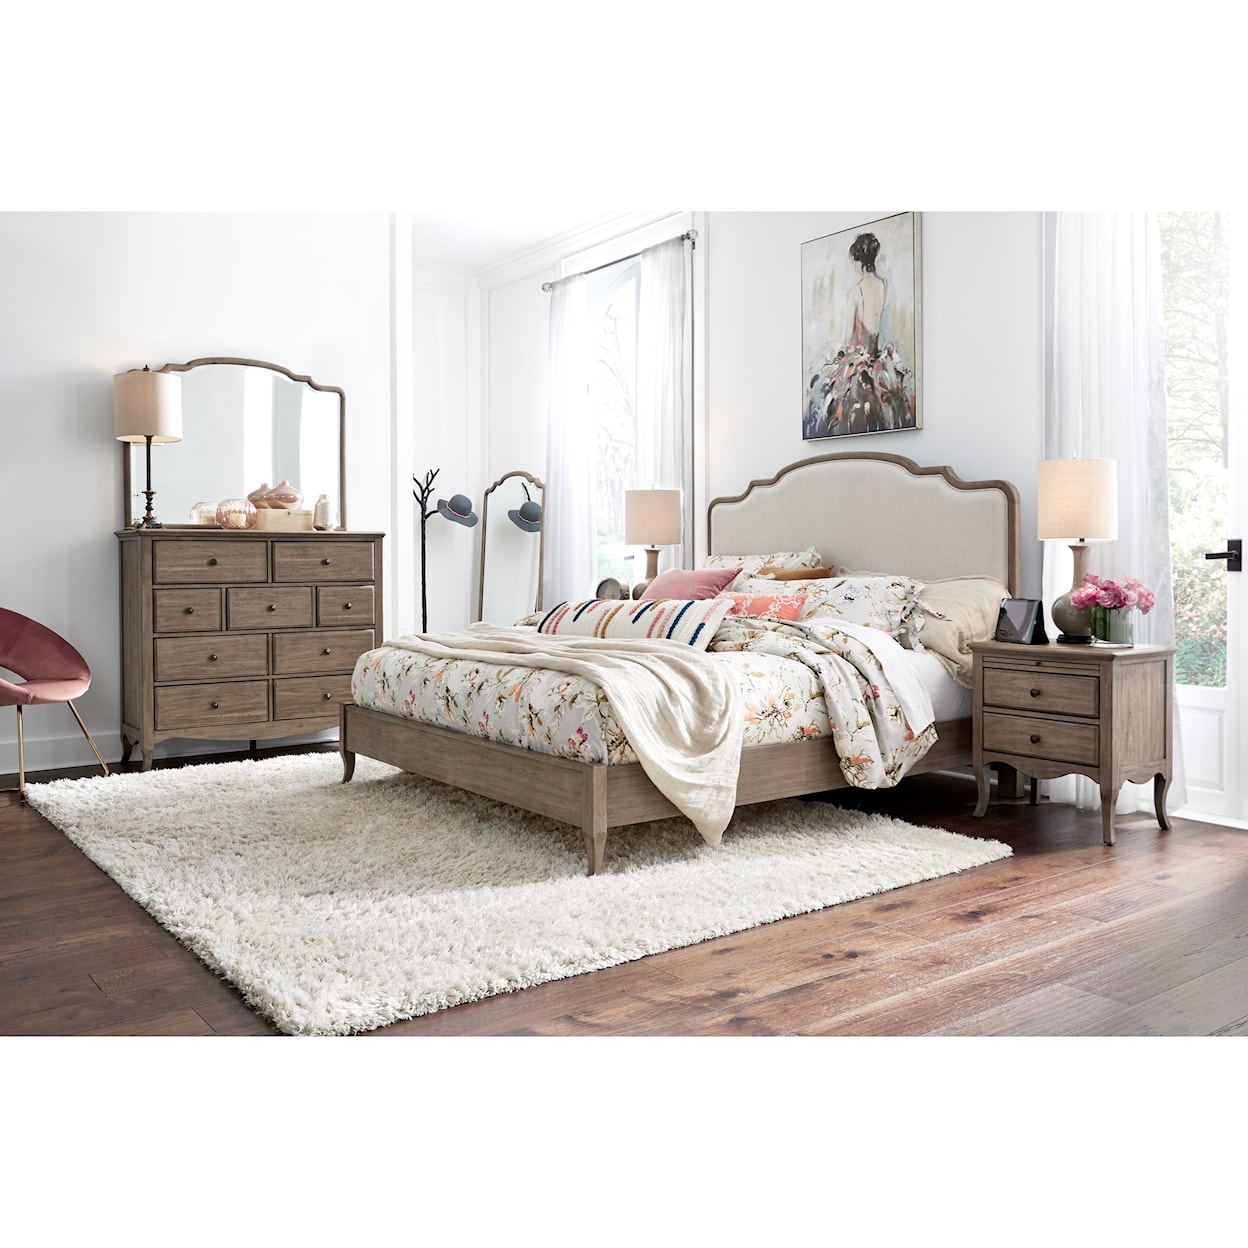 Aspenhome Provence King Bedroom Group